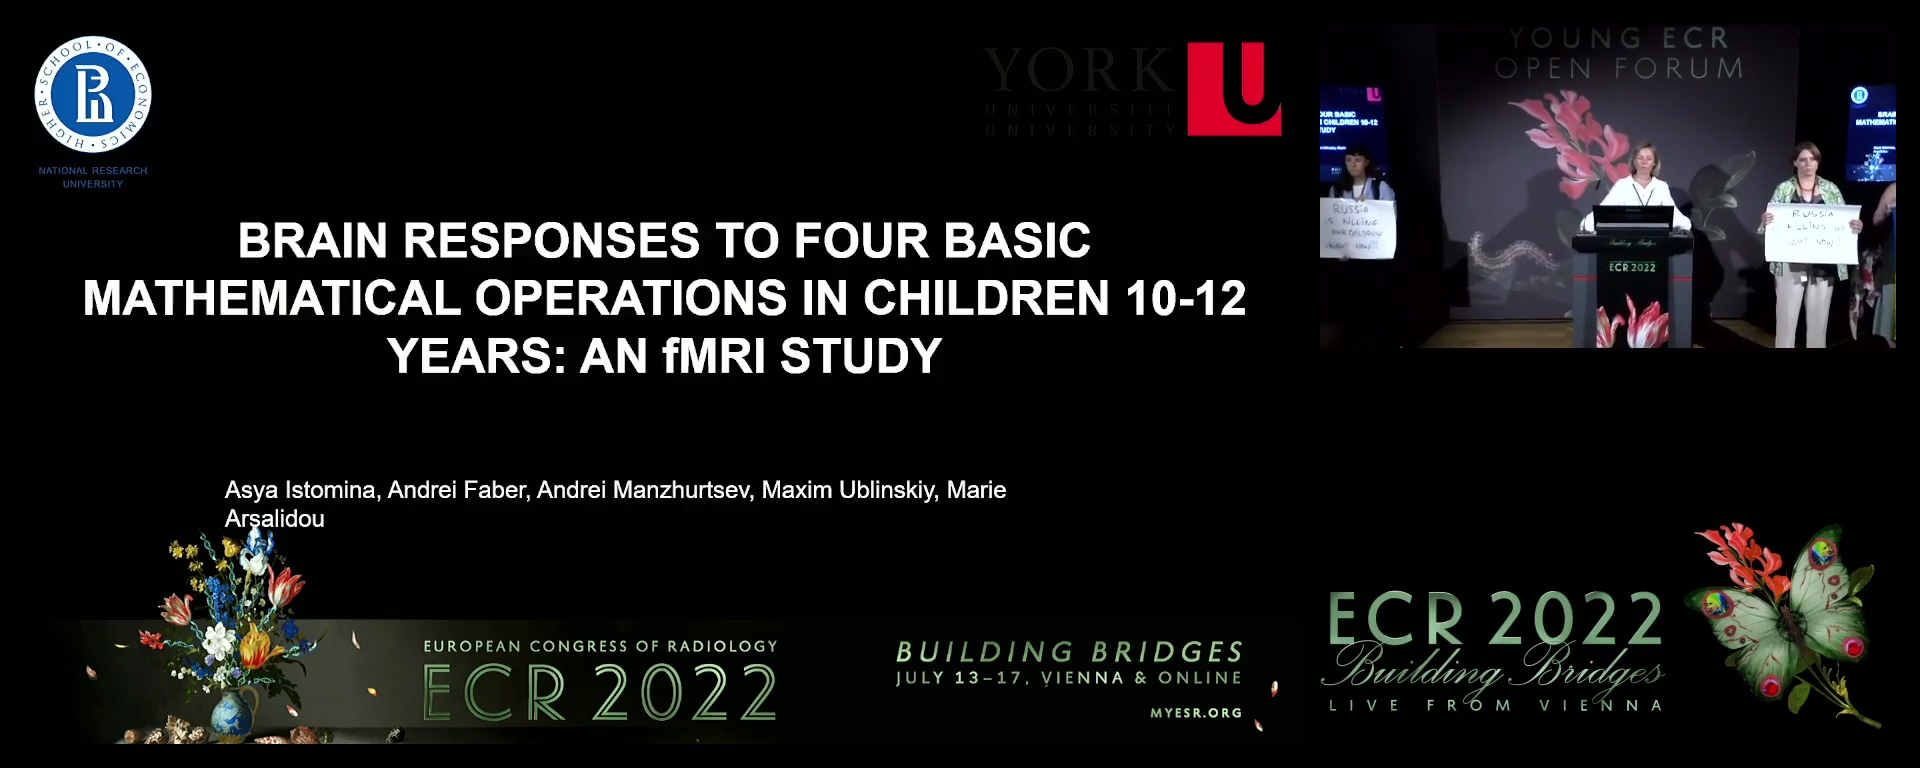 Brain Responses to Four Basic Mathematical Operations in Children 10-12 Years: An fMRI Study - Asya Istomina, Moscow / RU